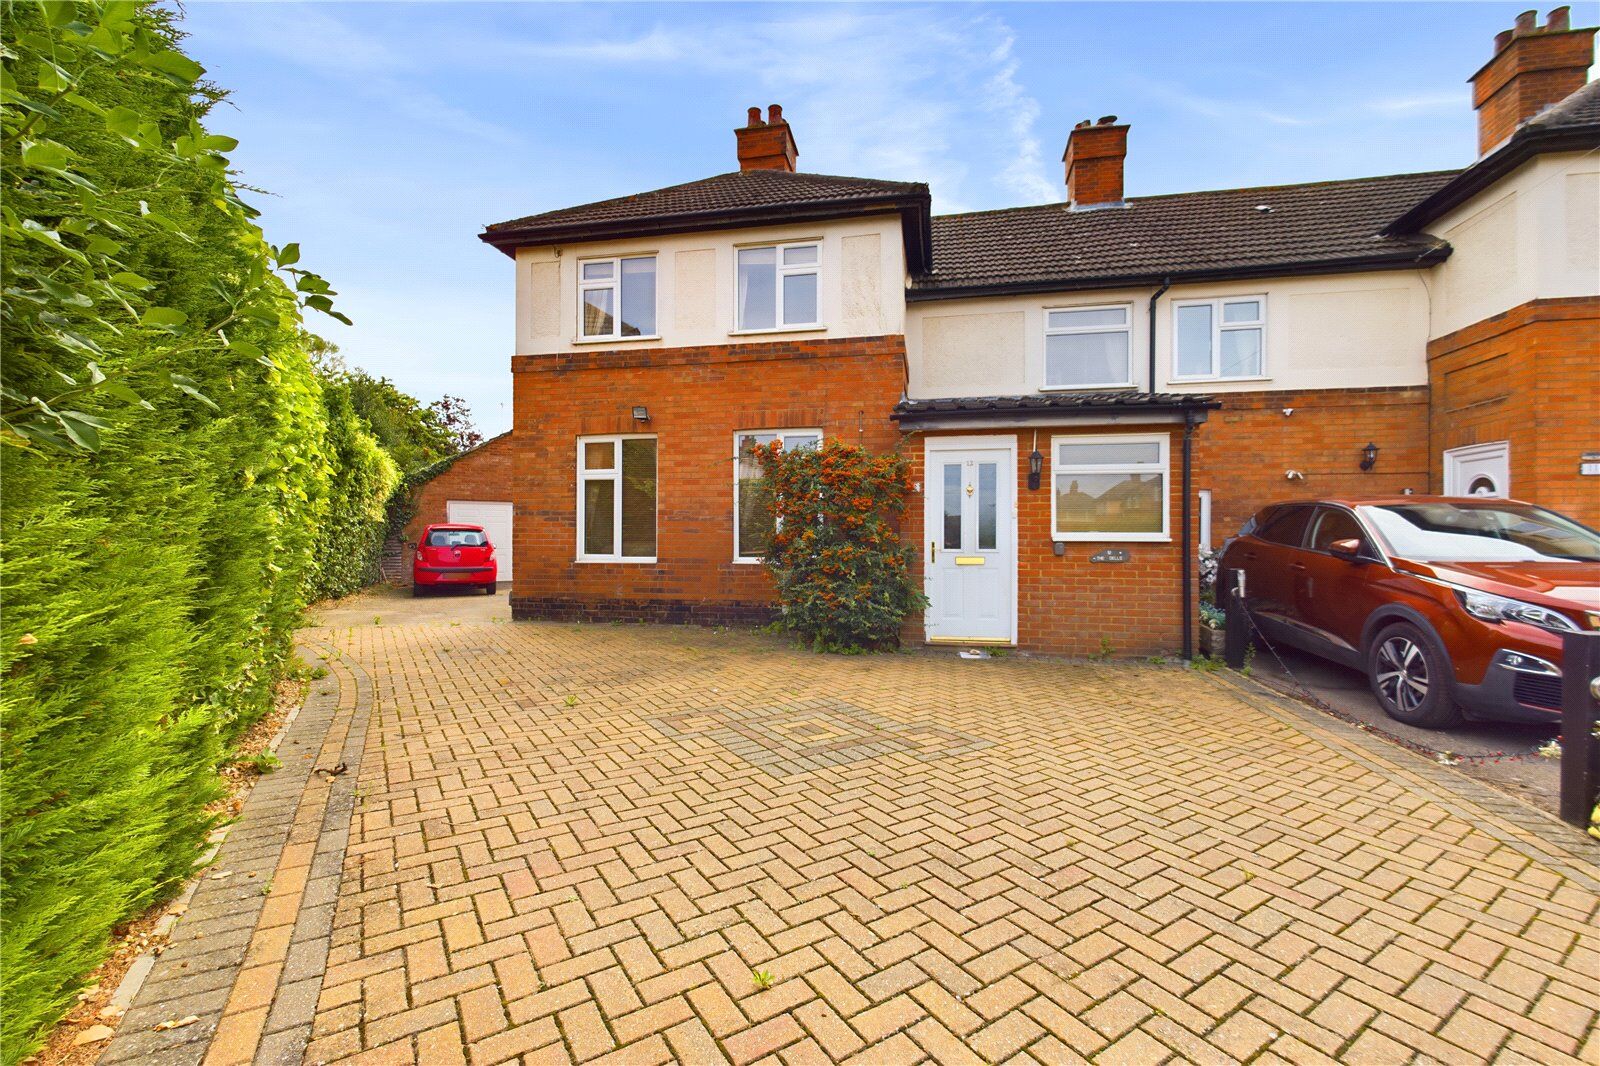 3 bedroom semi detached house for sale The Dells, Biggleswade, SG18, main image